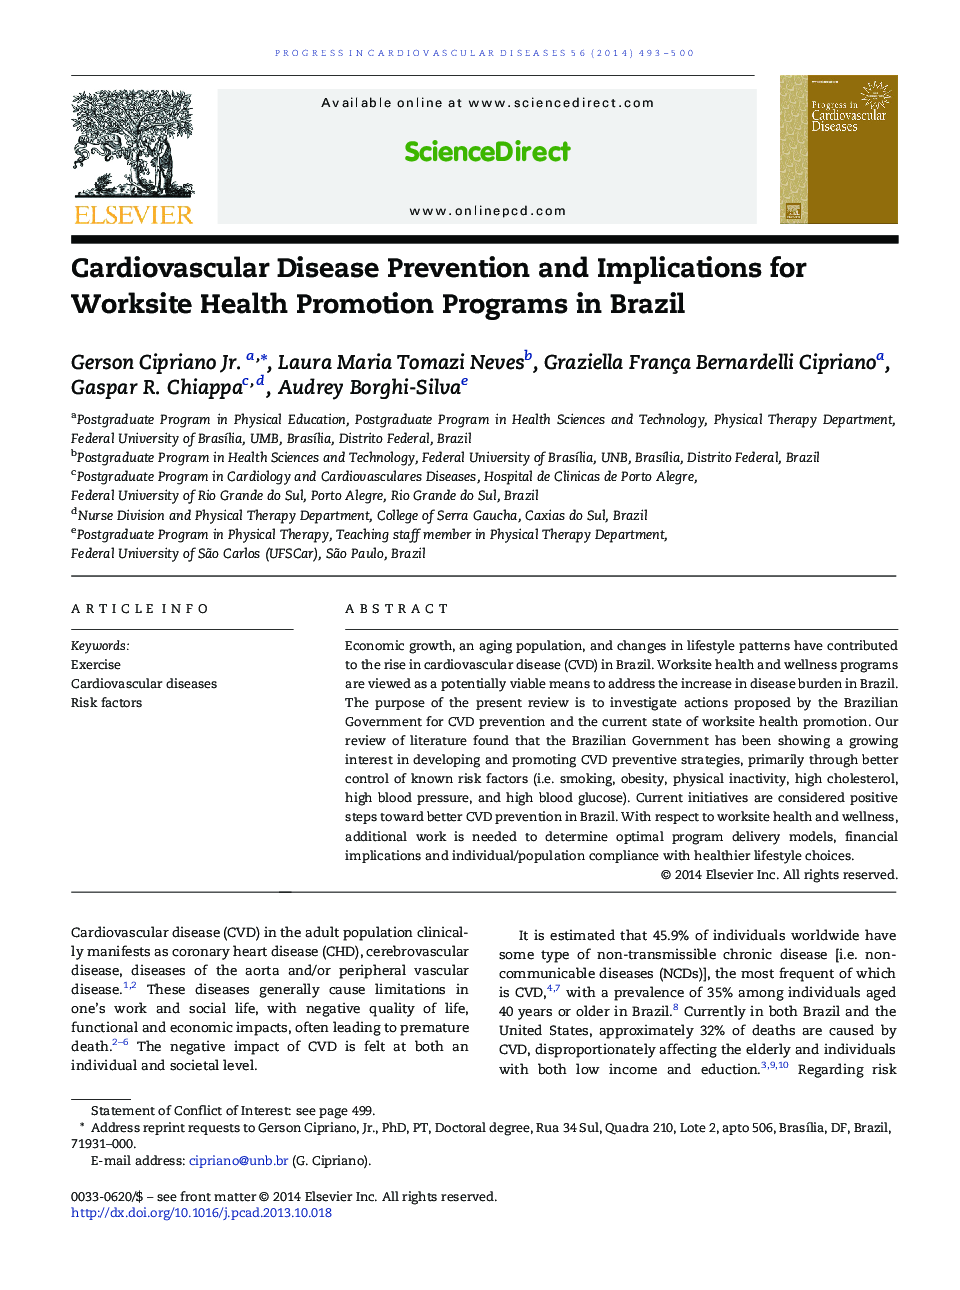 Cardiovascular Disease Prevention and Implications for Worksite Health Promotion Programs in Brazil